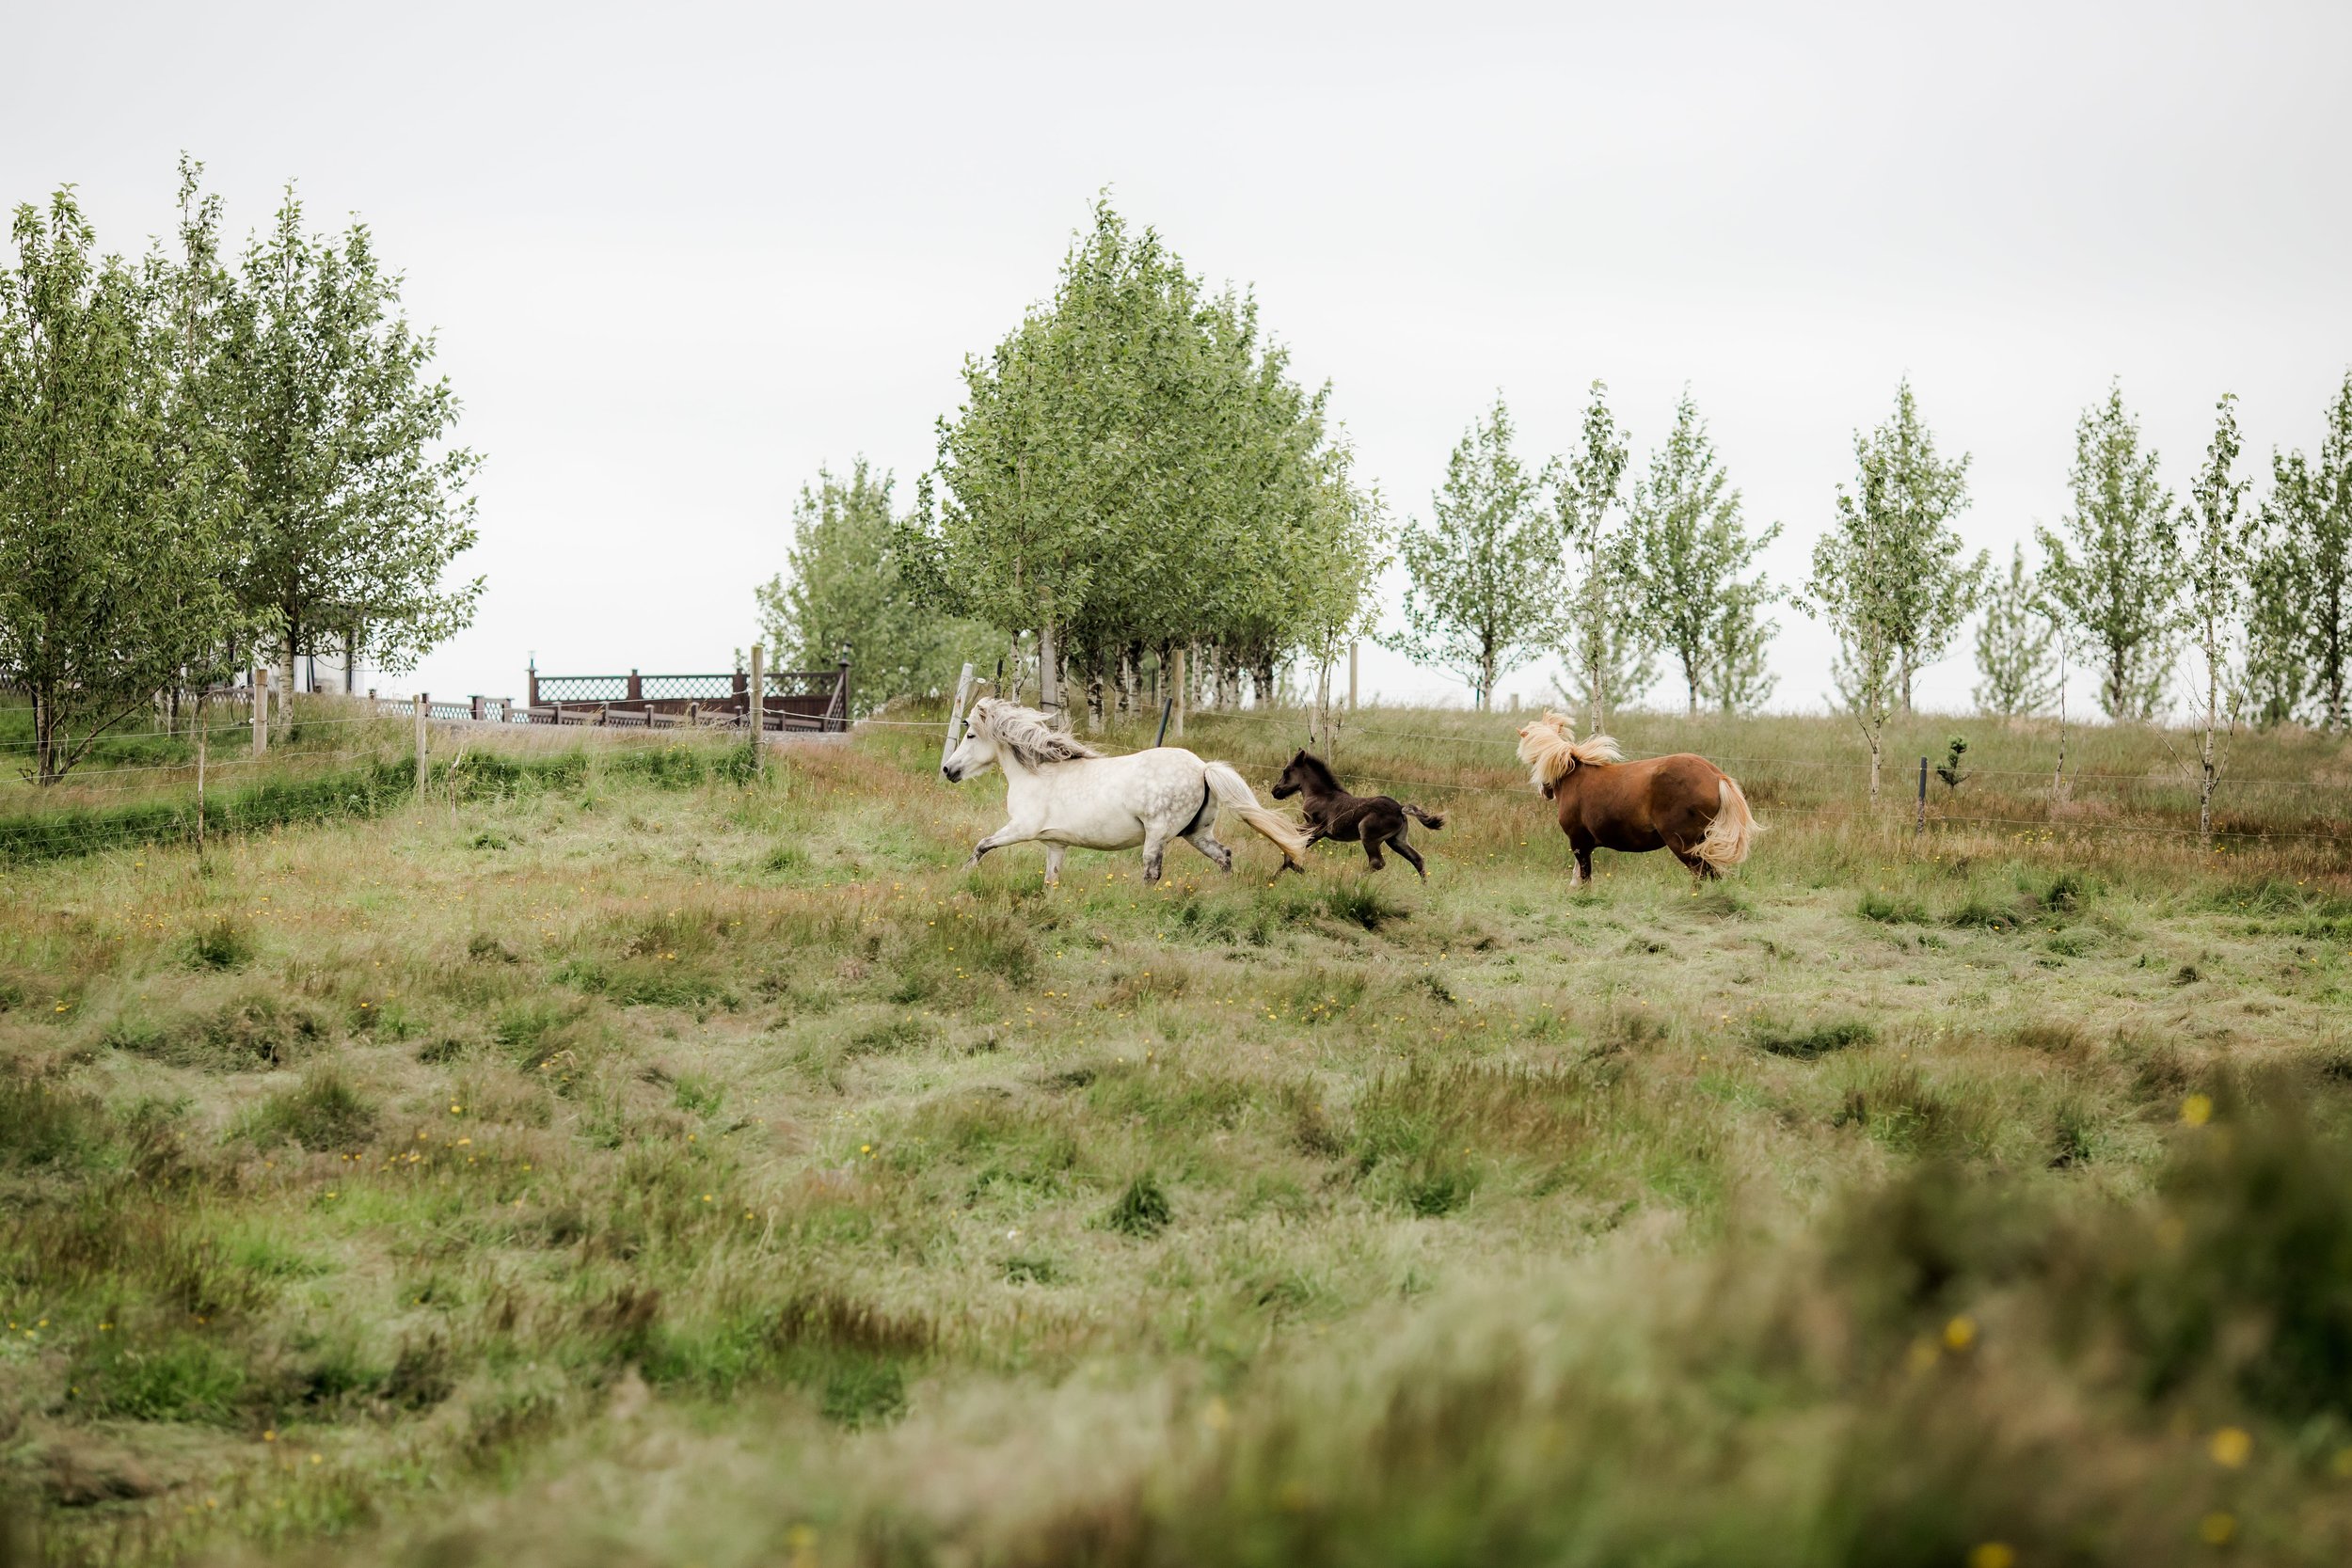 Horses in Iceland by Christina Swanson now on Cottage Hill45.jpg